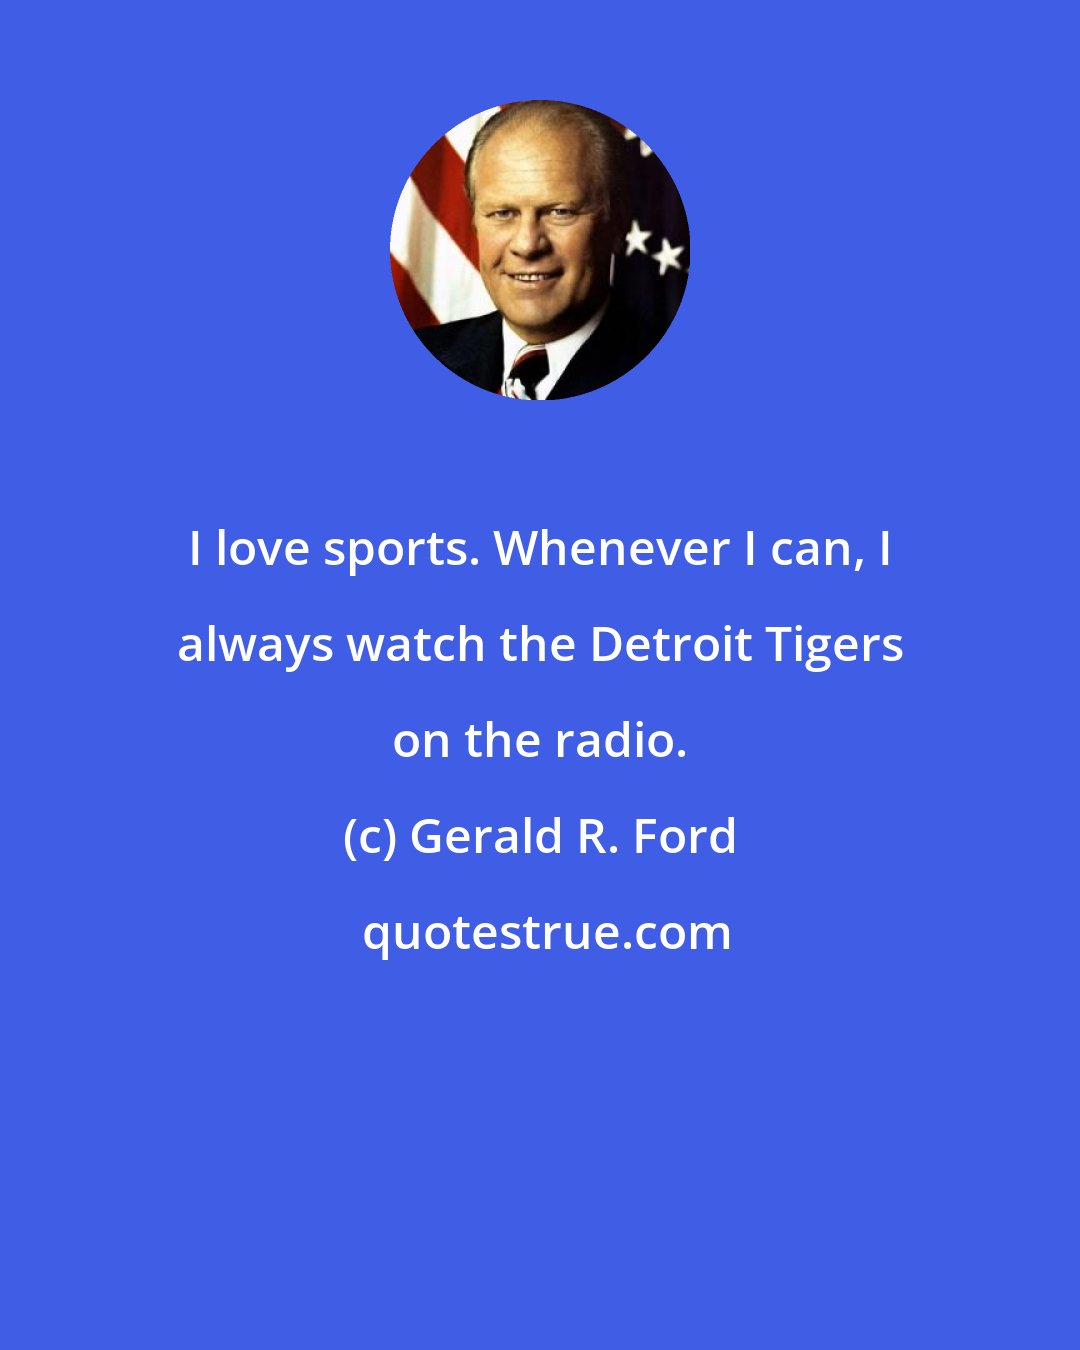 Gerald R. Ford: I love sports. Whenever I can, I always watch the Detroit Tigers on the radio.